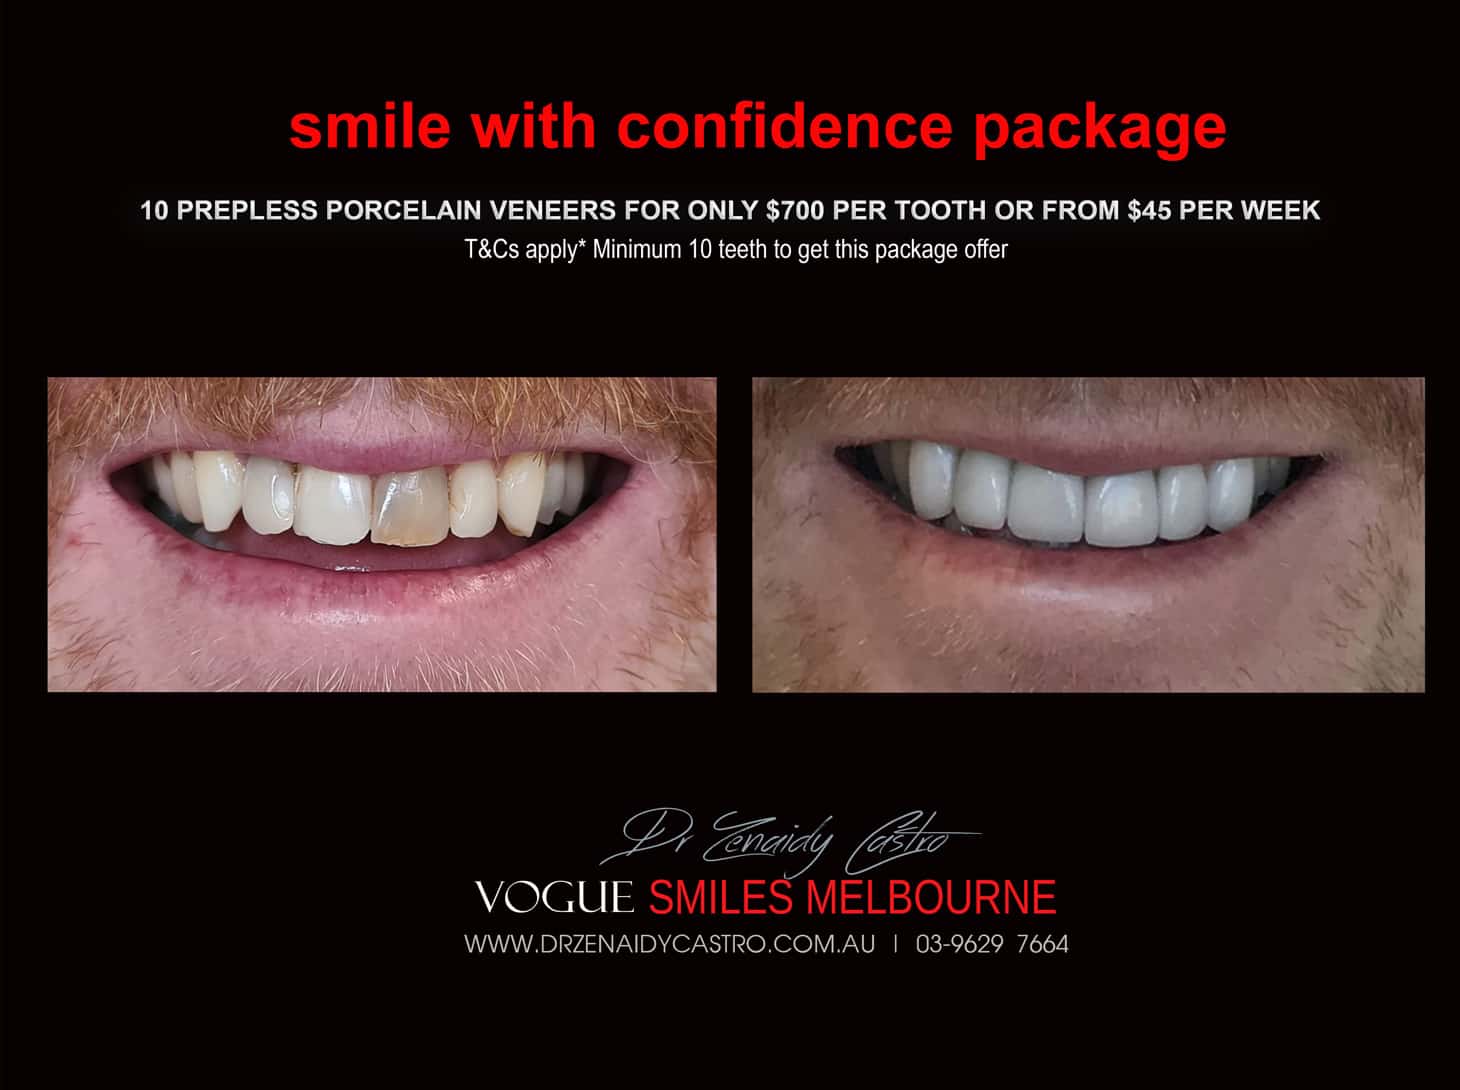 Porcelain Veneer Specials and Packages in Melbourne WITH PREPLESS / NO-PREP OR NO GRINDING -BEST DENTIST IN MELBOURNE - BEST COSMETIC DENTIST IN MELBOURNE CBD